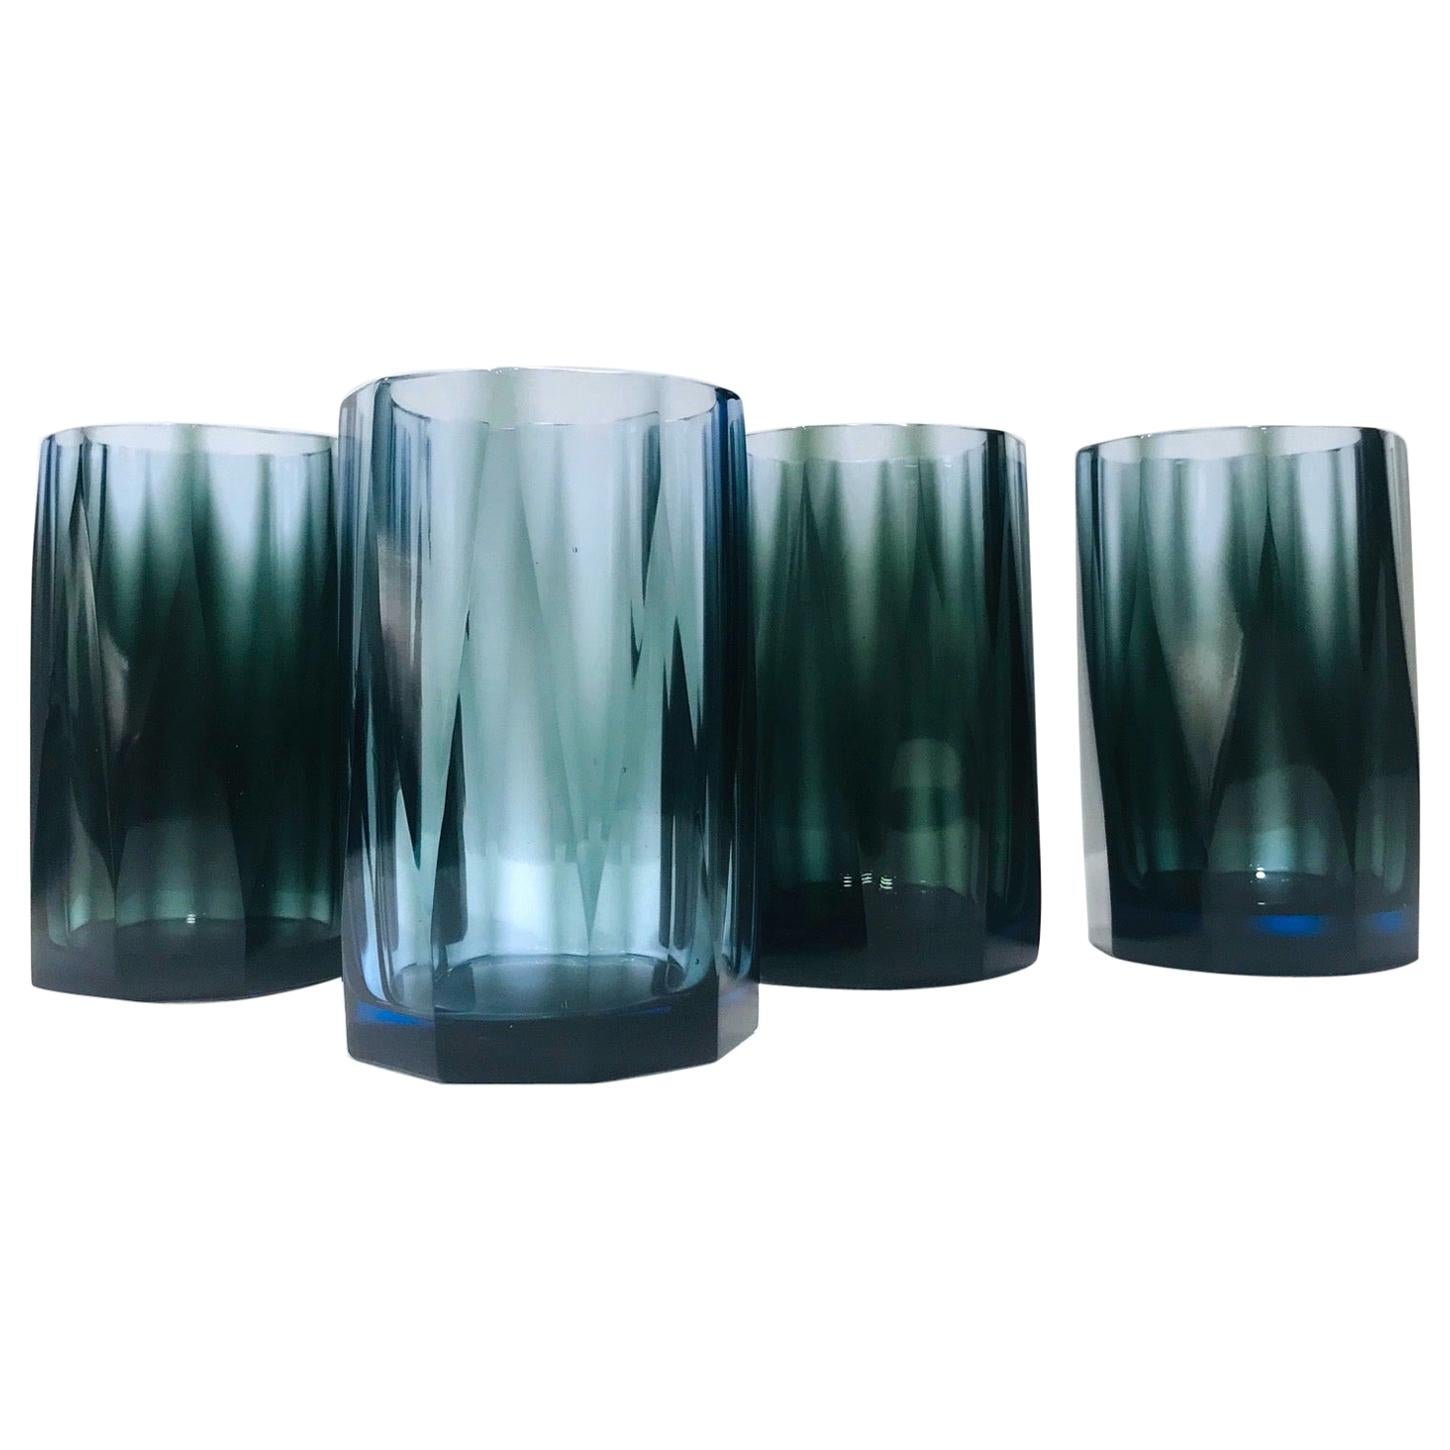 Set of Four Hollywood Regency Barware Glasses with Faceted Design in Blue-Grey